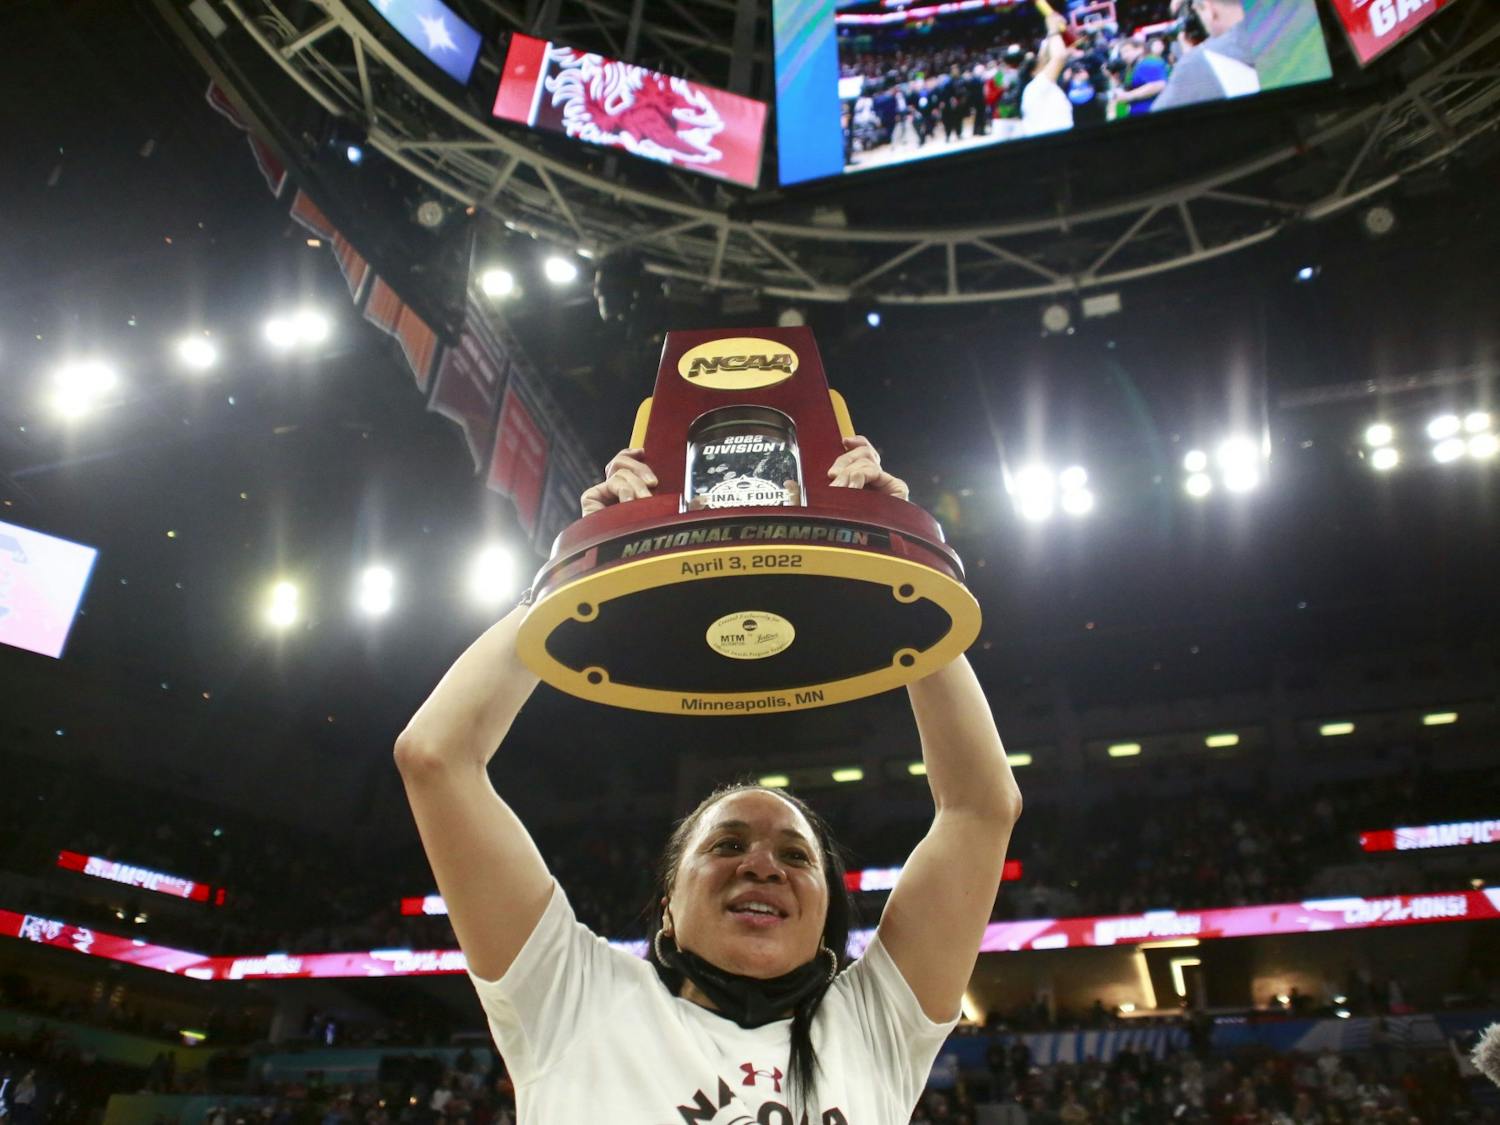 The South Carolina Gamecocks defeated the University of Connecticut Huskies 64-49 in the National Championship on April 4, 2022. This is the second time head coach Dawn Staley has led the Gamecocks to a national title after the 2017 team secured USC's first women's basketball national championship win.&nbsp;